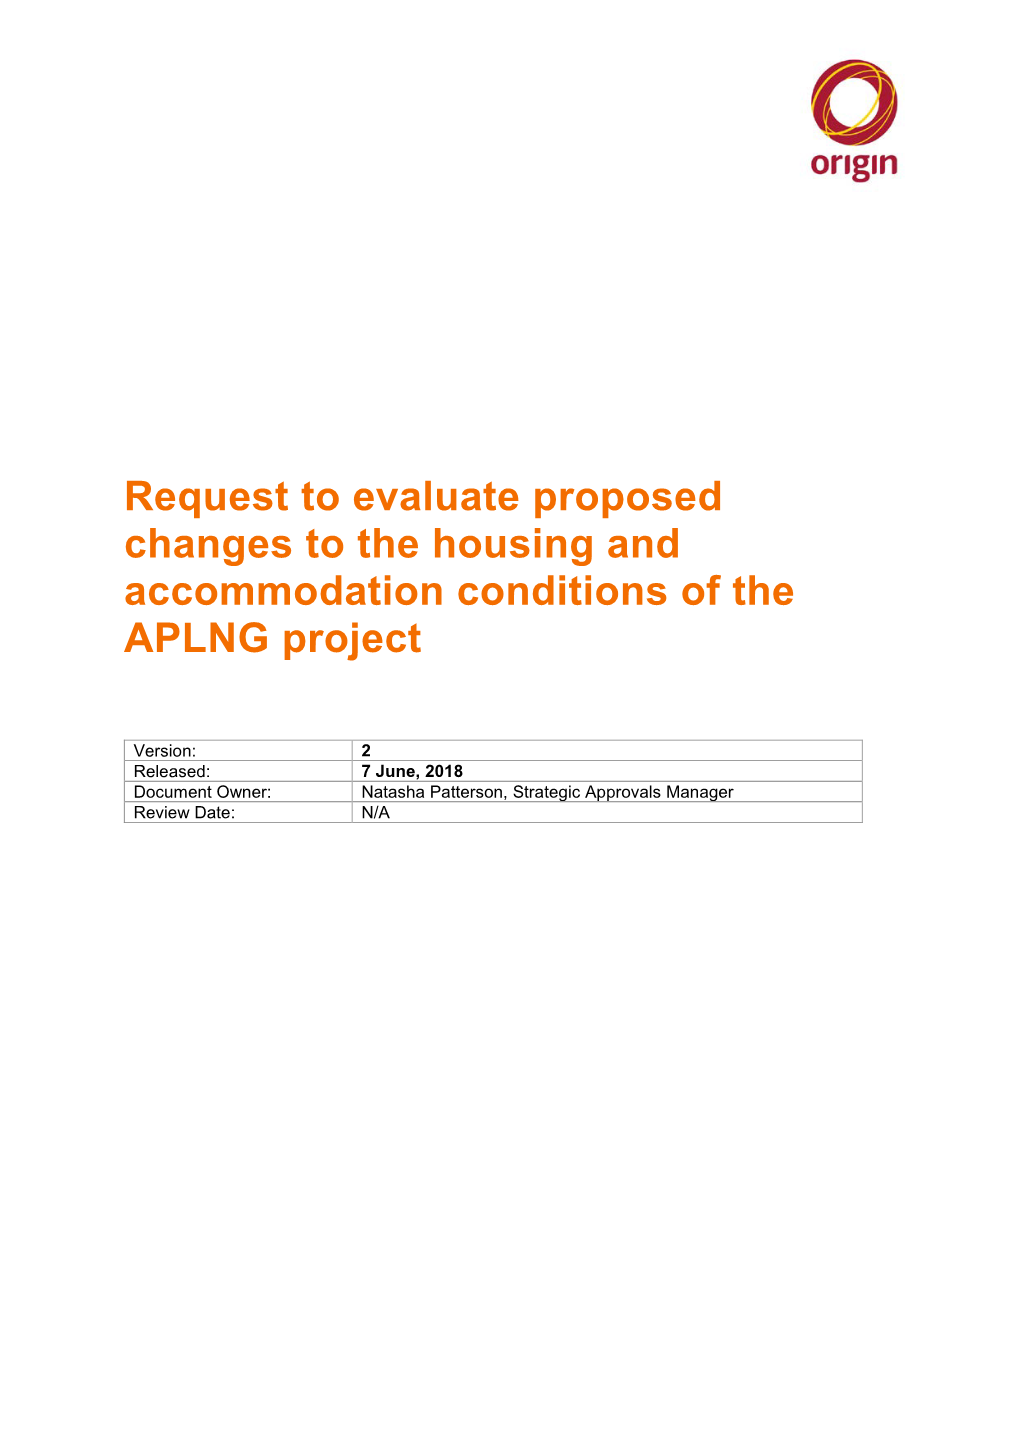 Request to Evaluate Project Change to APLNG Project